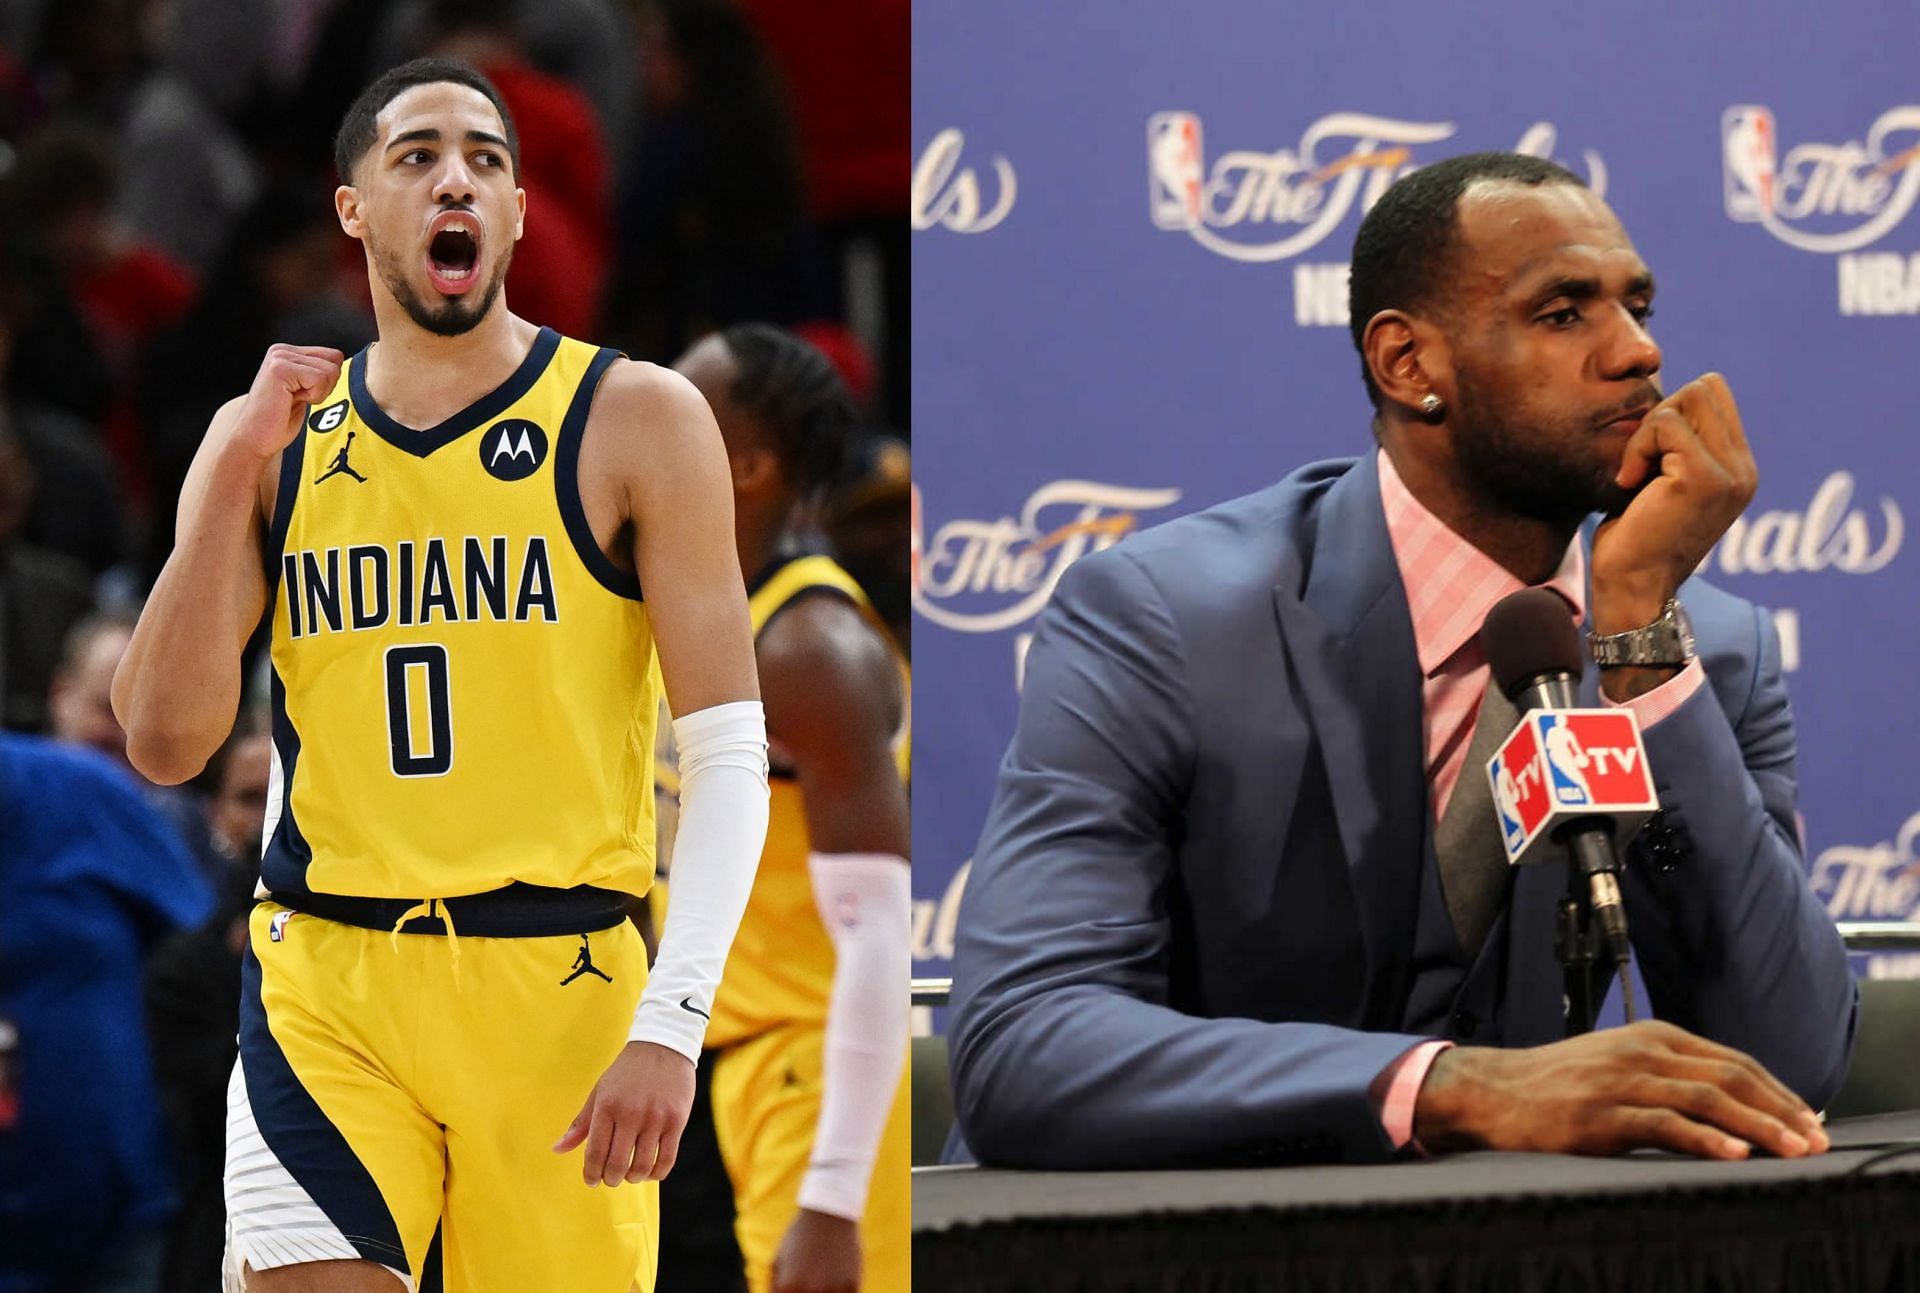 Tyrese Haliburton referenced a popular LeBron James quote on Twitter